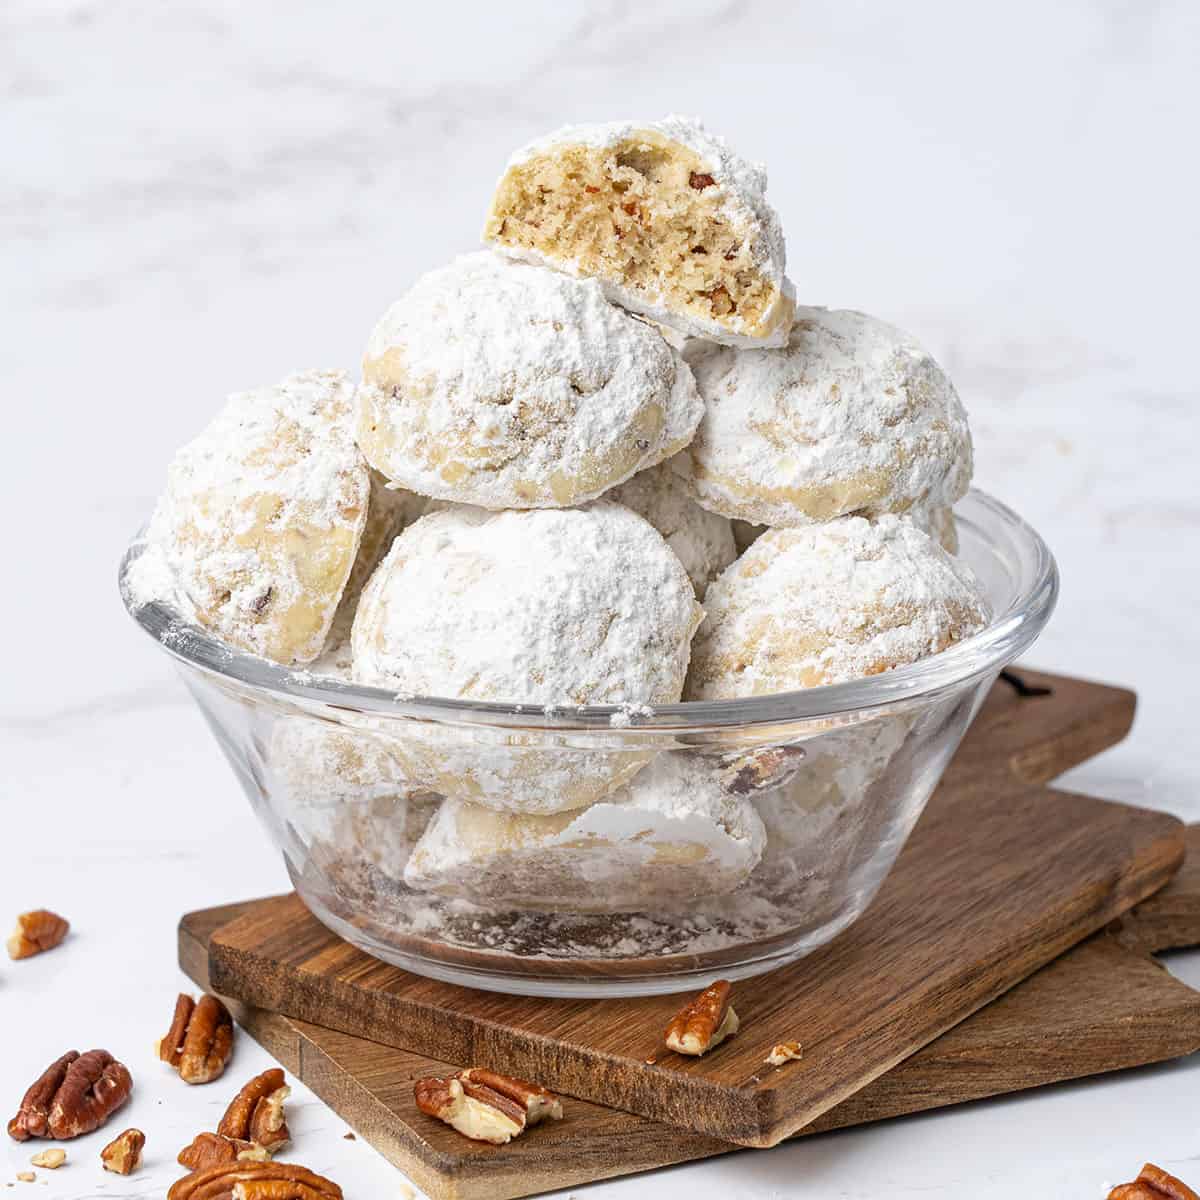 <p>These sweet, crunchy, and buttery <strong><a href="https://www.spatuladesserts.com/pecan-snowball-cookies/">pecan snowball cookies</a></strong> are a delicious way to decorate your dessert table this holiday season! Also known as Mexican wedding cookies or Russian tea cookies, these snowy treats use just a handful of basic pantry staples to create a fun-shaped and eye-catching dessert that all ages will love. It is one of the best Christmas cookie recipes for your December parties and even better when wrapped up as a gift!</p><p><strong>Go to the recipe: <a href="https://www.spatuladesserts.com/pecan-snowball-cookies/">Pecan Snowball Cookies</a></strong></p>